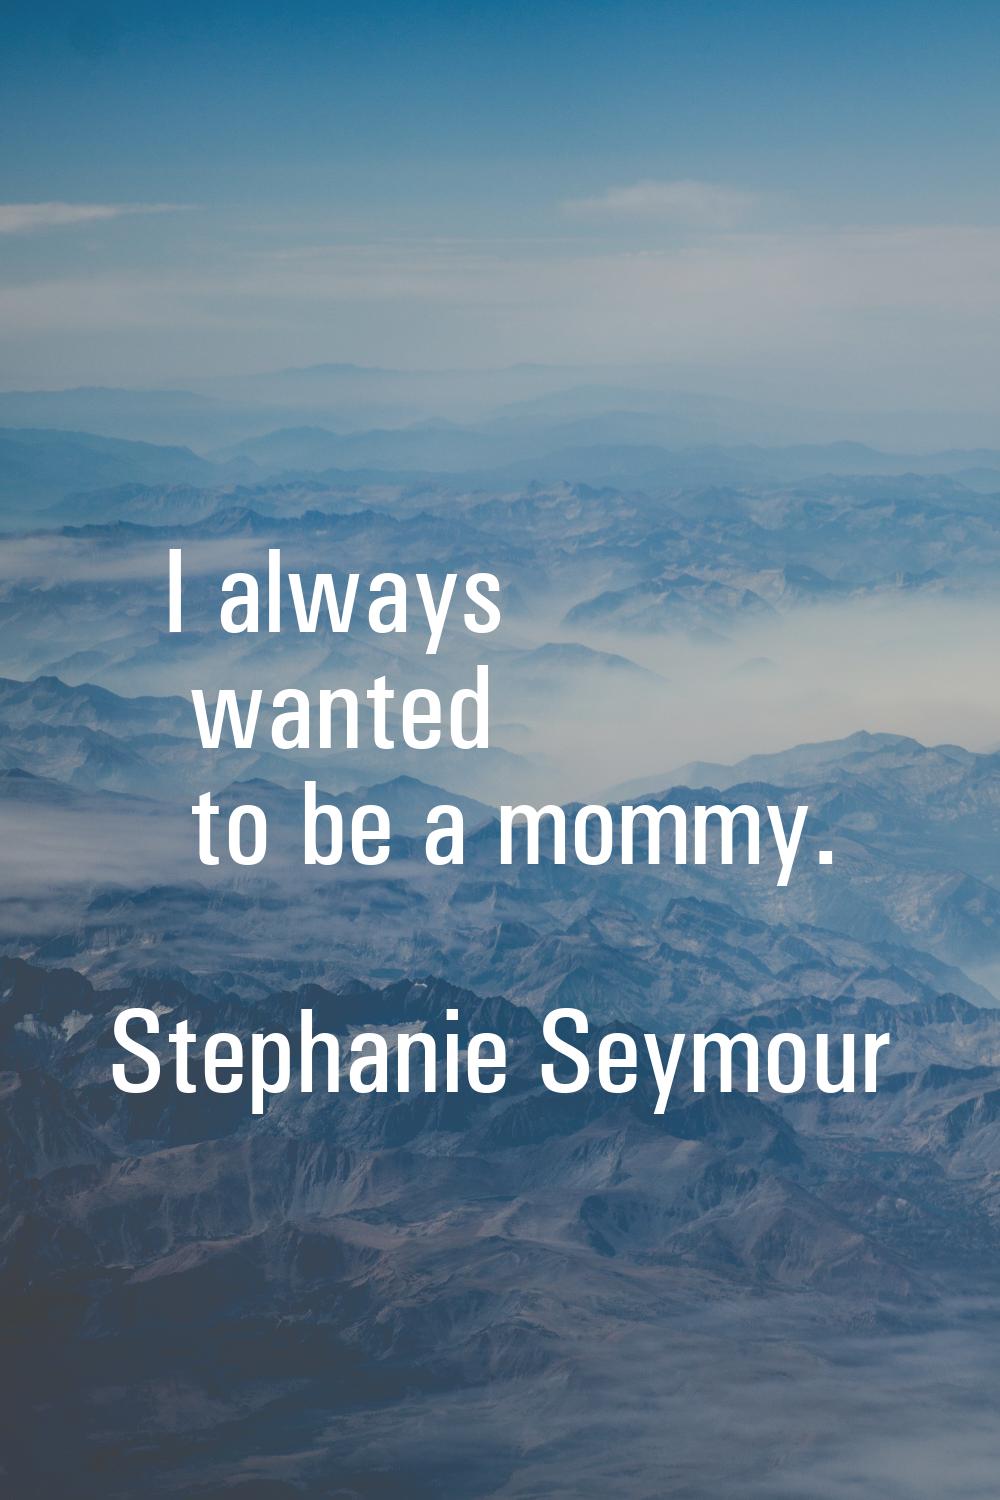 I always wanted to be a mommy.